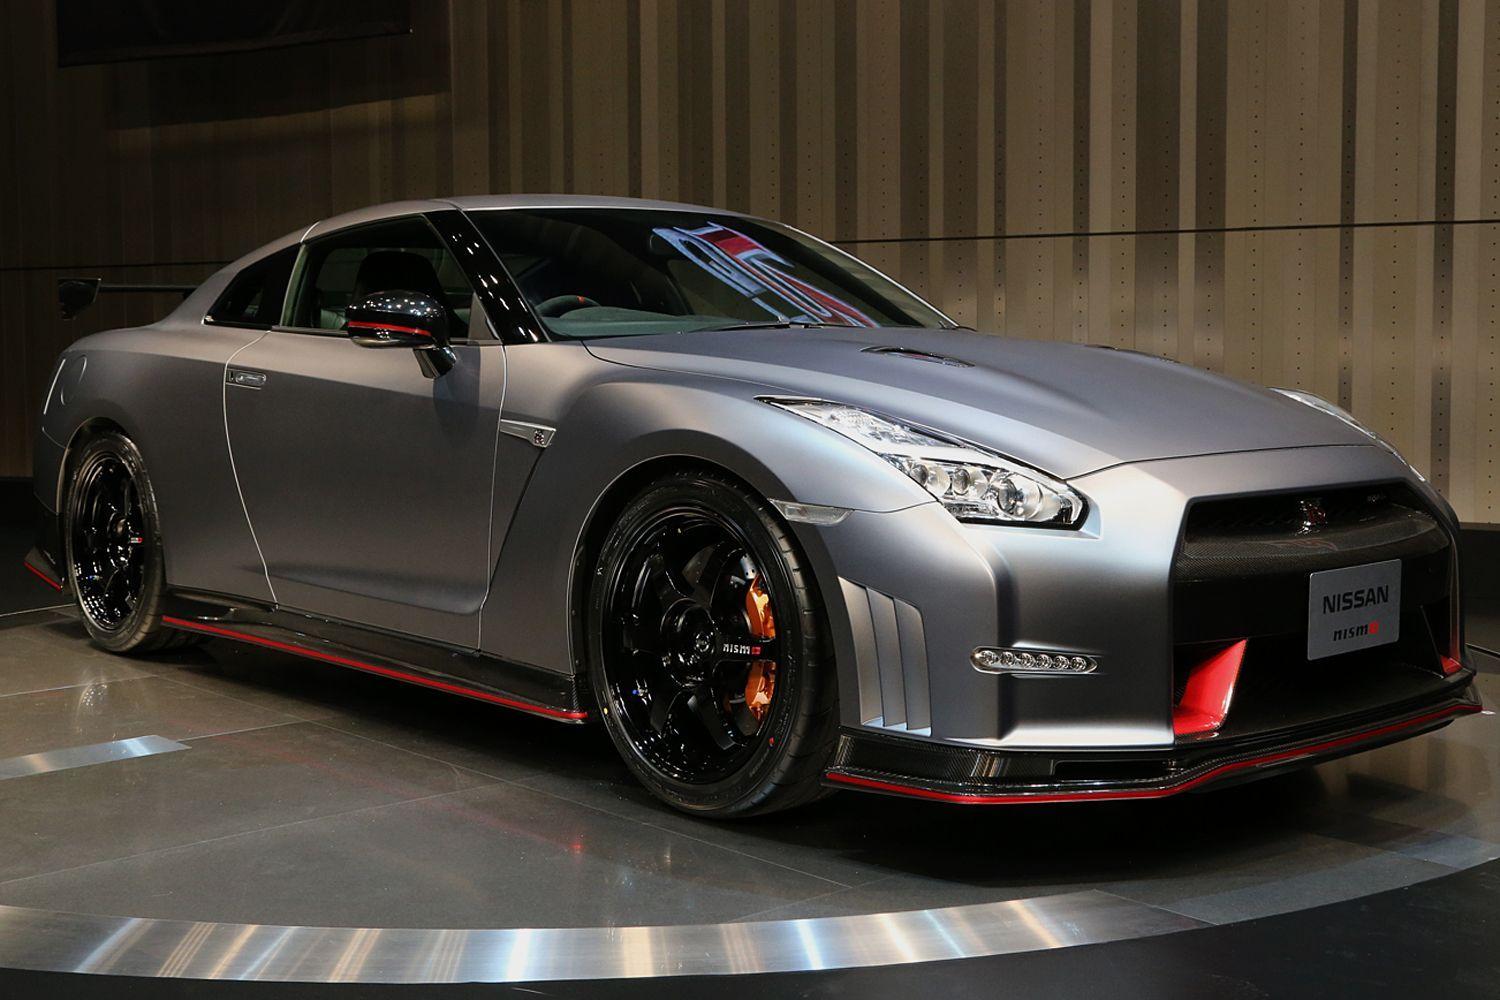 New Skyline 2015 Awesome Wallpaper. New Nissan Car Photo